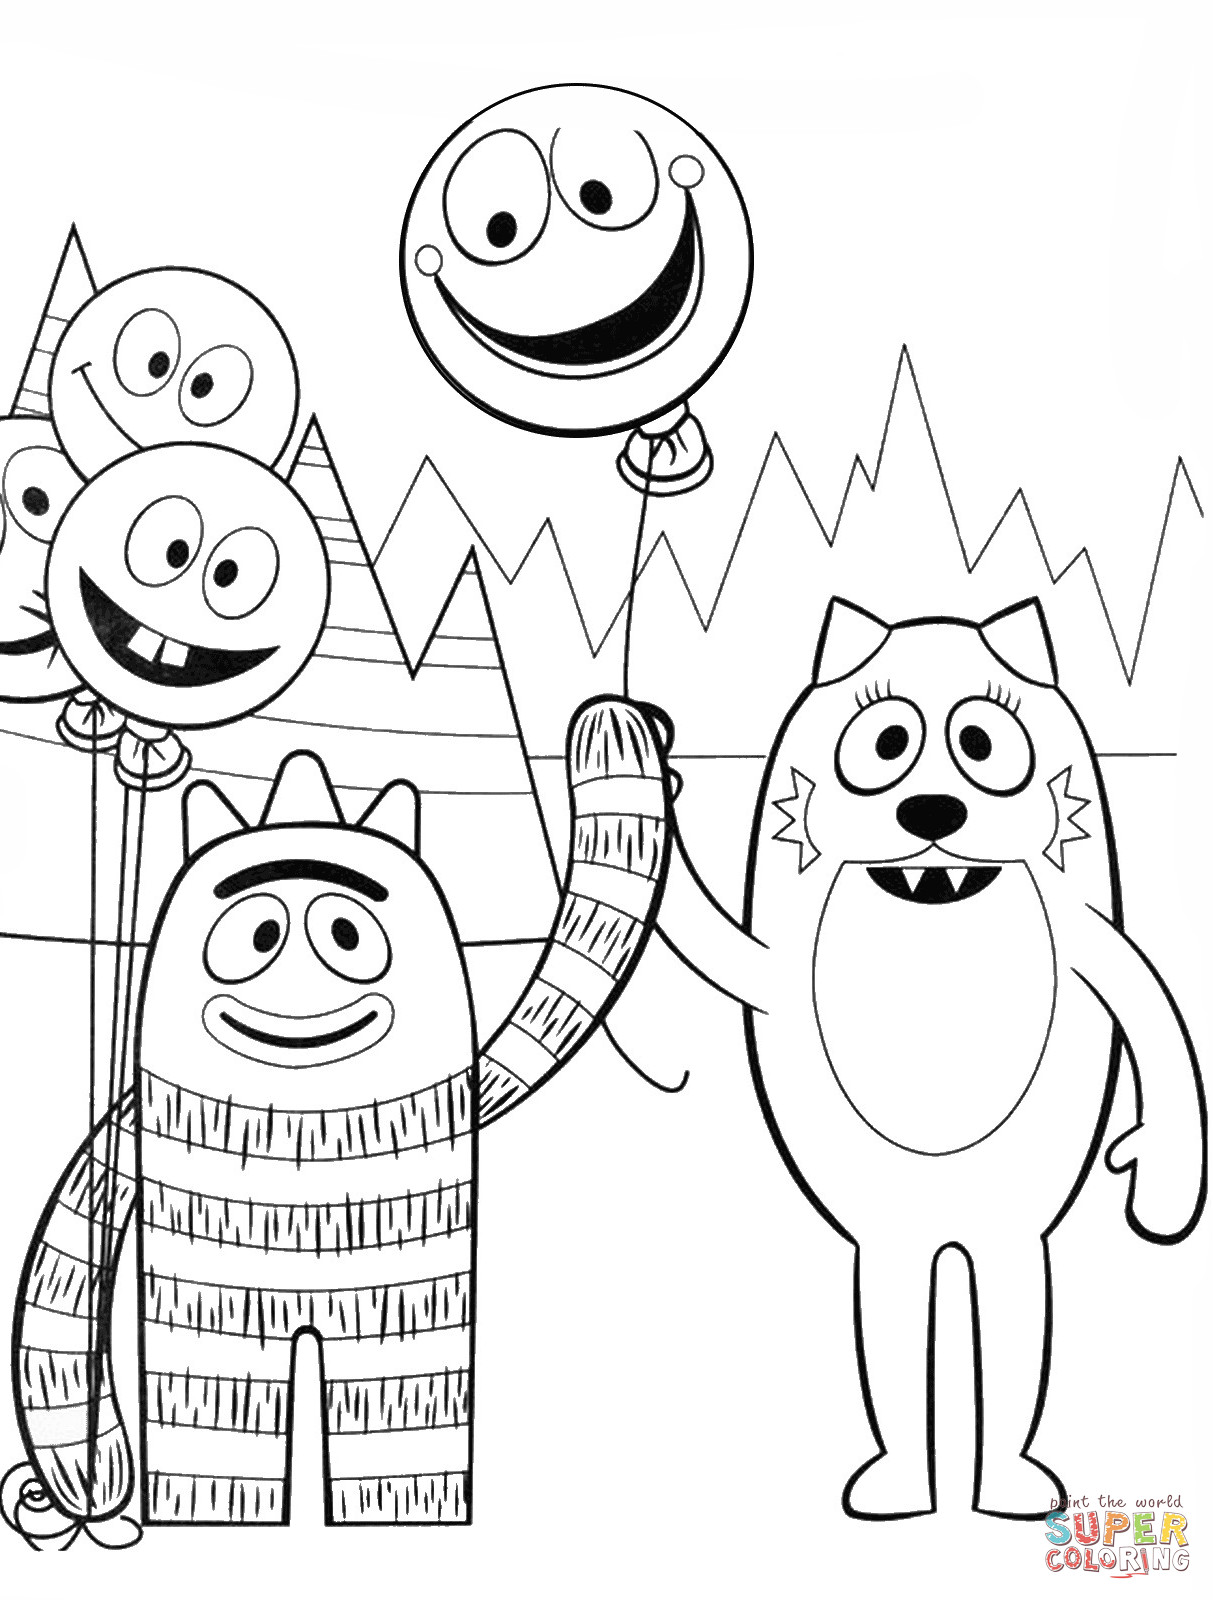 Yo Gabba Gabba Coloring Pages
 Brobee and Toodee are Playing with Balloons coloring page